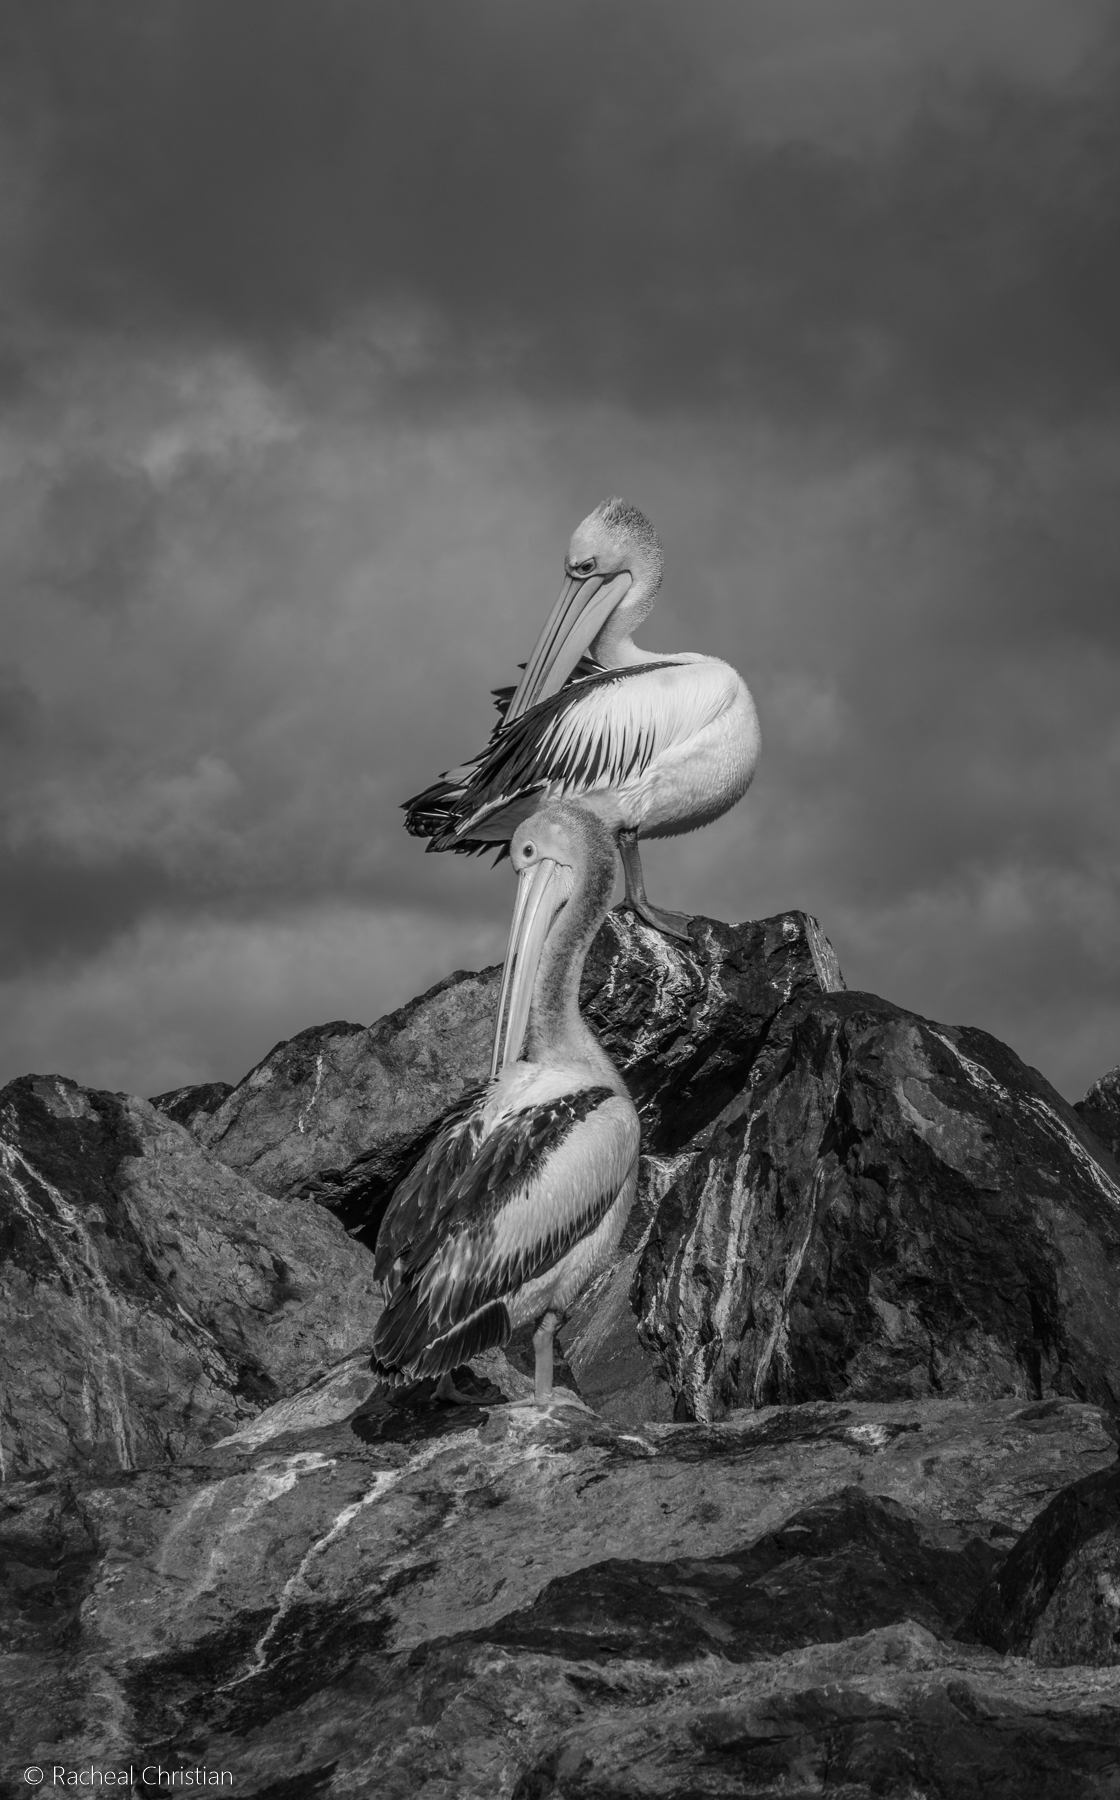 Pelican: 'Pelicans On Rocks' in Black & White by Racheal Christian - Photographed at Eden Wharf in NSWrachealchristianphotography.com